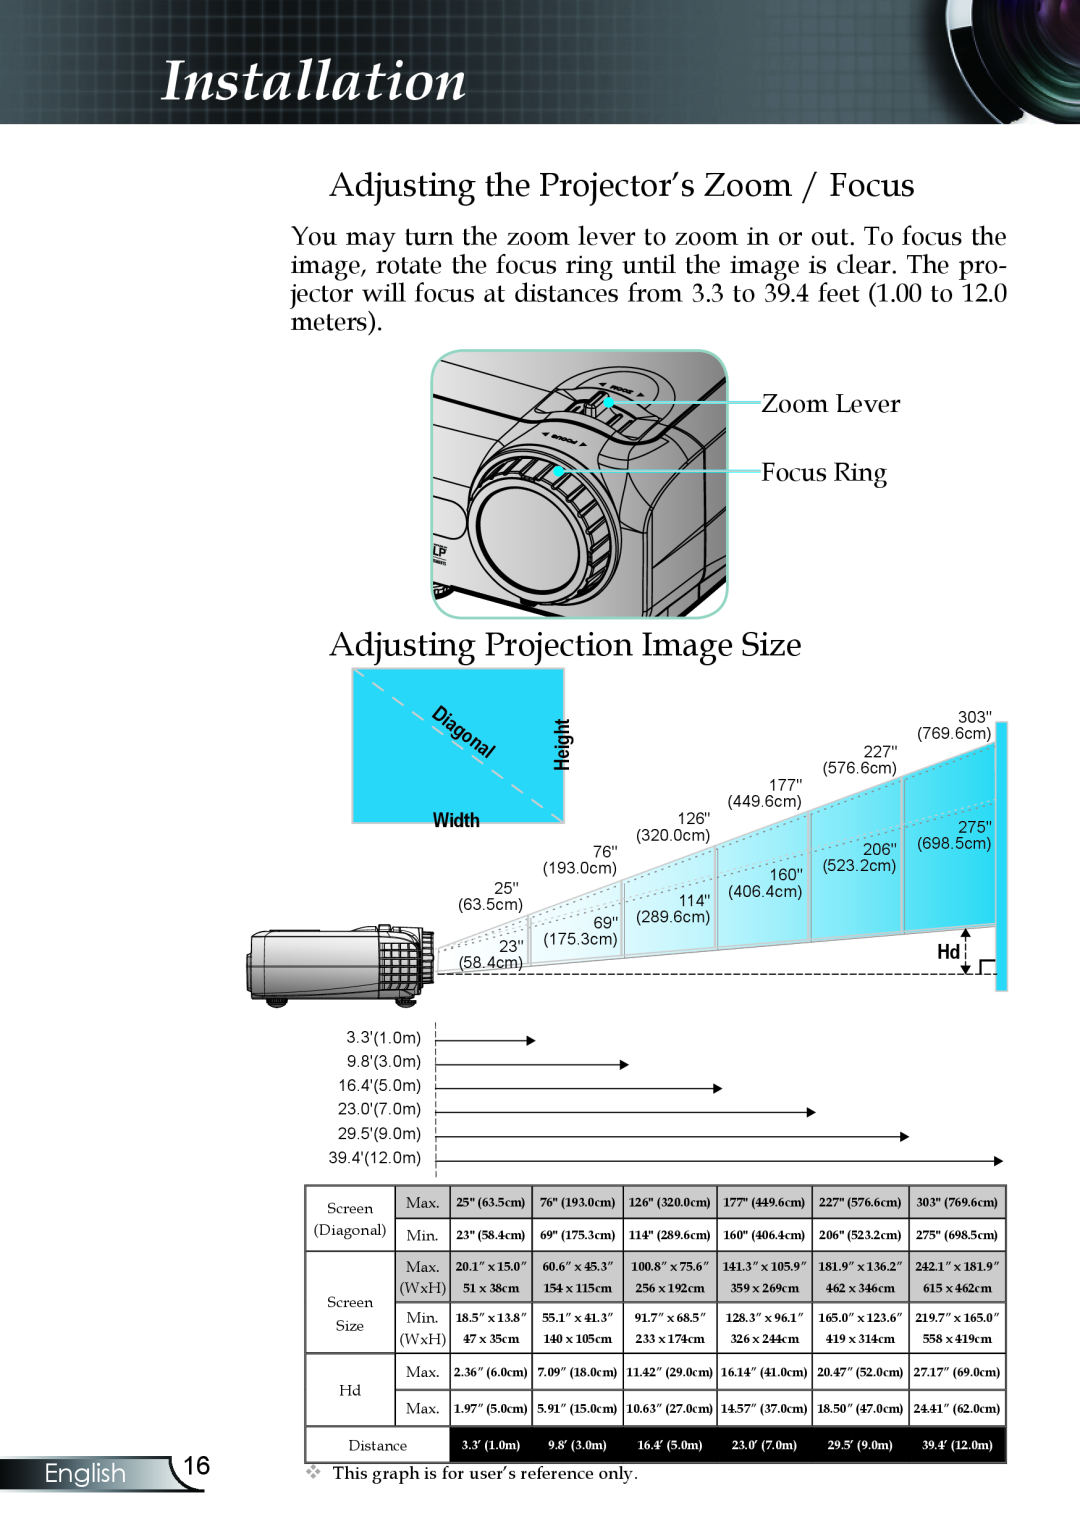 Optoma Technology TX330 Adjusting the Projector’s Zoom / Focus, Adjusting Projection Image Size, Installation, English 